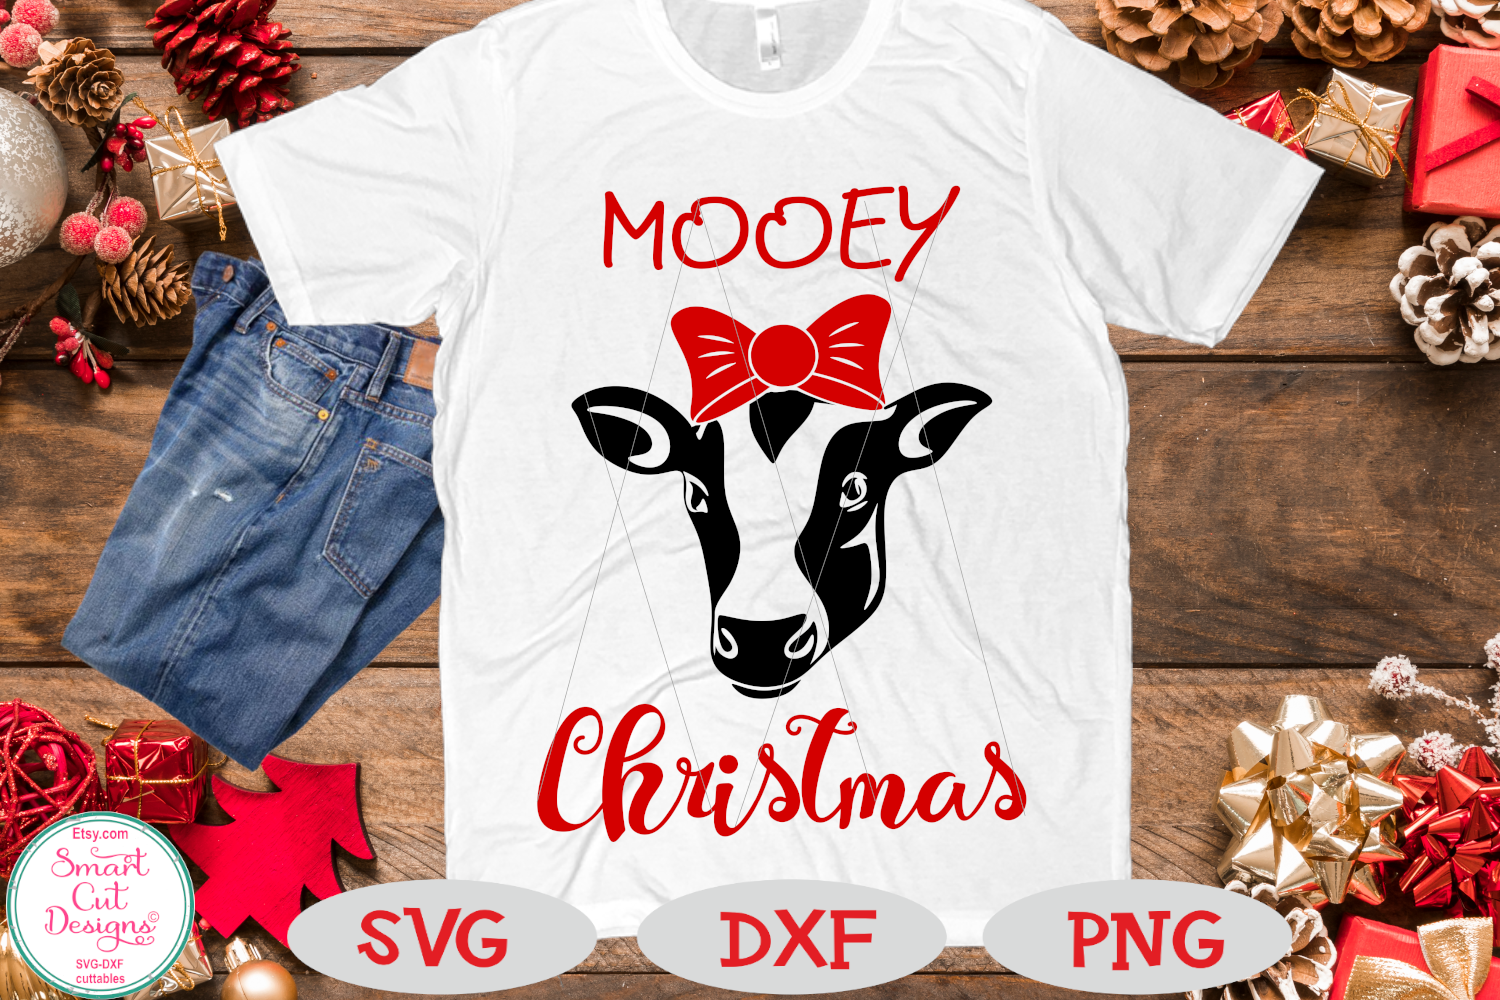 Download Free Mooey Christmas Svg Farm Christmas Funny Christmas Svg SVG DXF Cut File